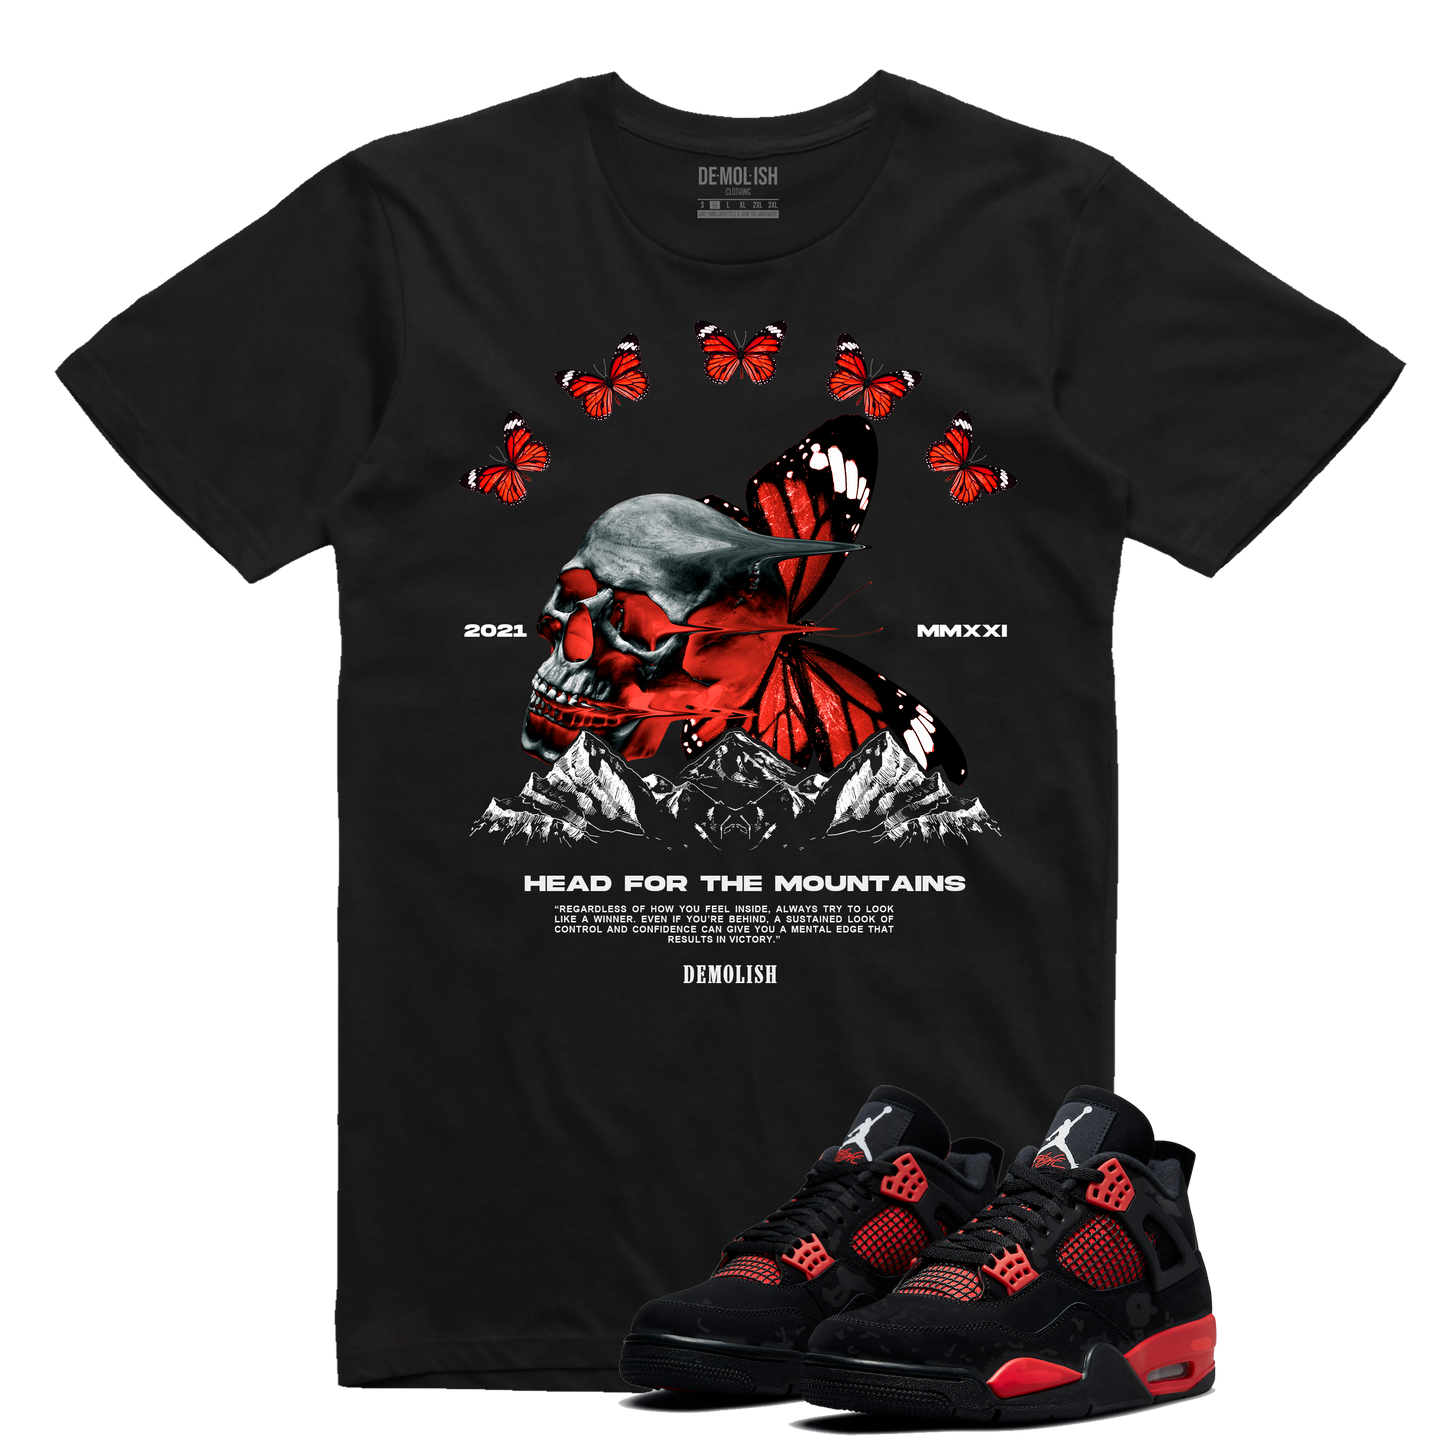 Head For The Mountains Tee (Black/Red) /D5